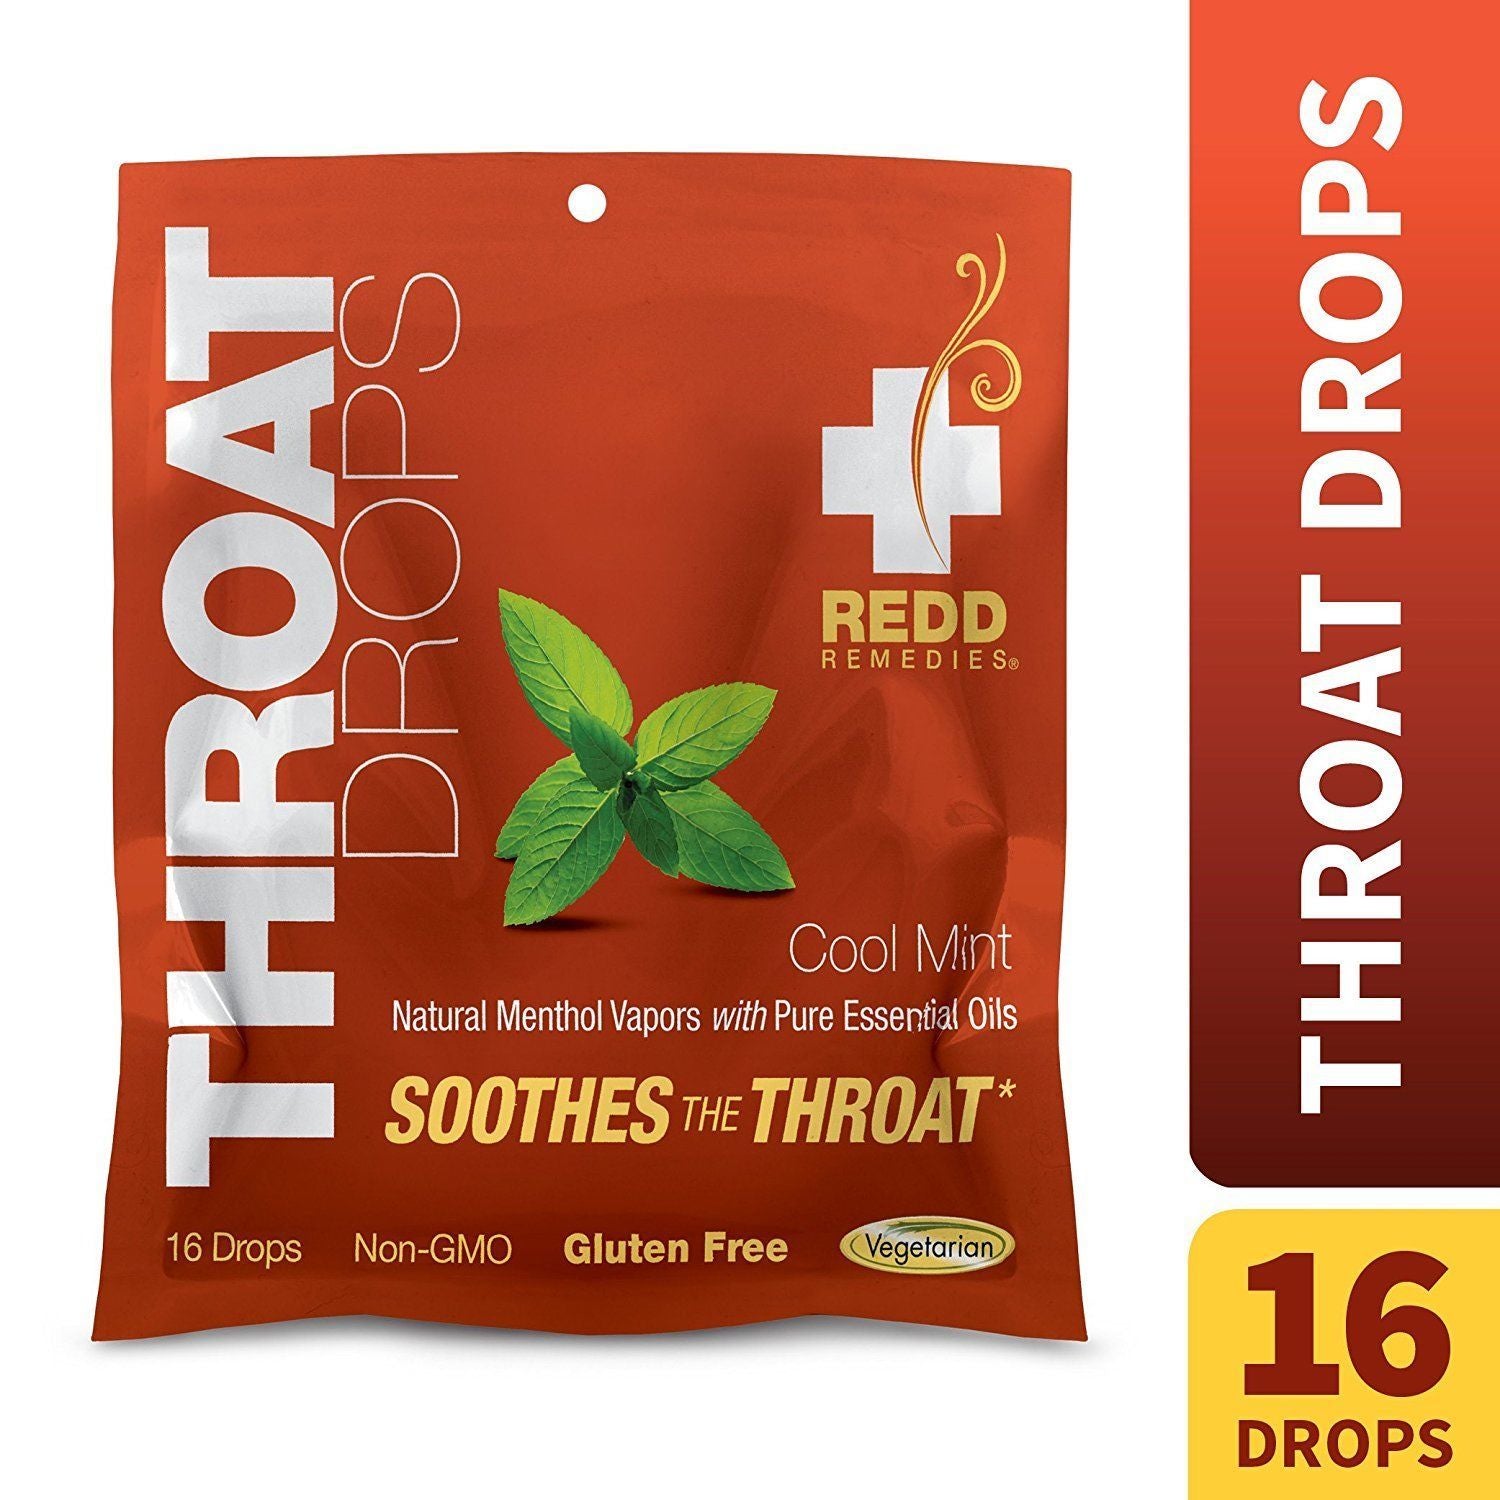 Redd Remedies - Throat Drops, Herbal Cough Drops To Soothe And Support Healthy